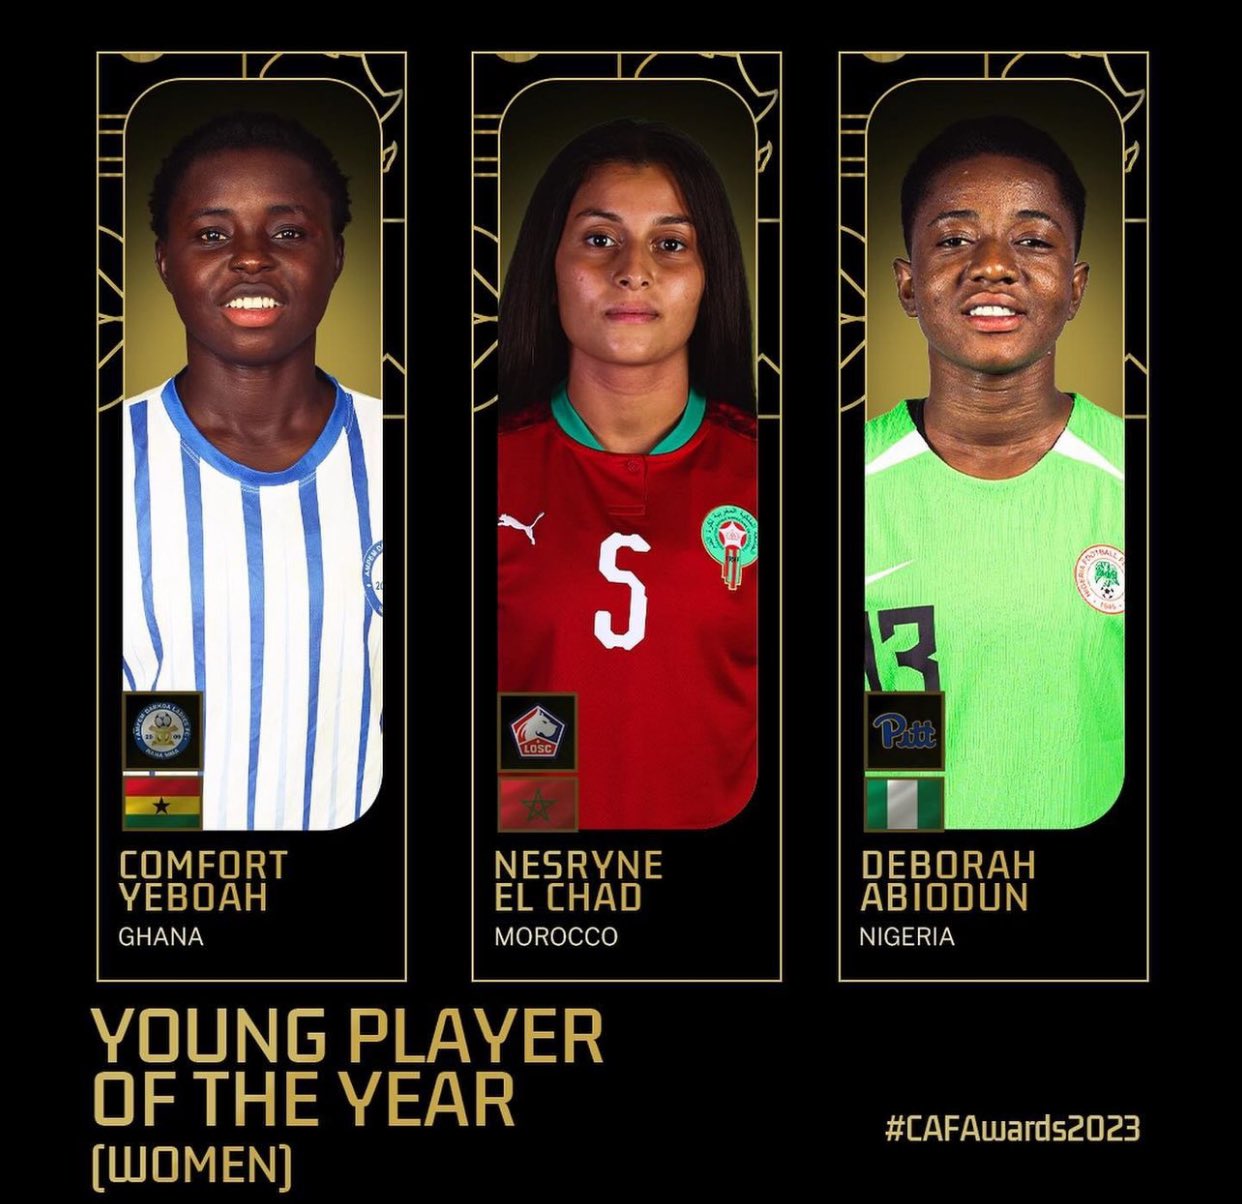 Ghana’s Comfort Yeboah makes shortlist for CAF Women’s Young Player of the Year